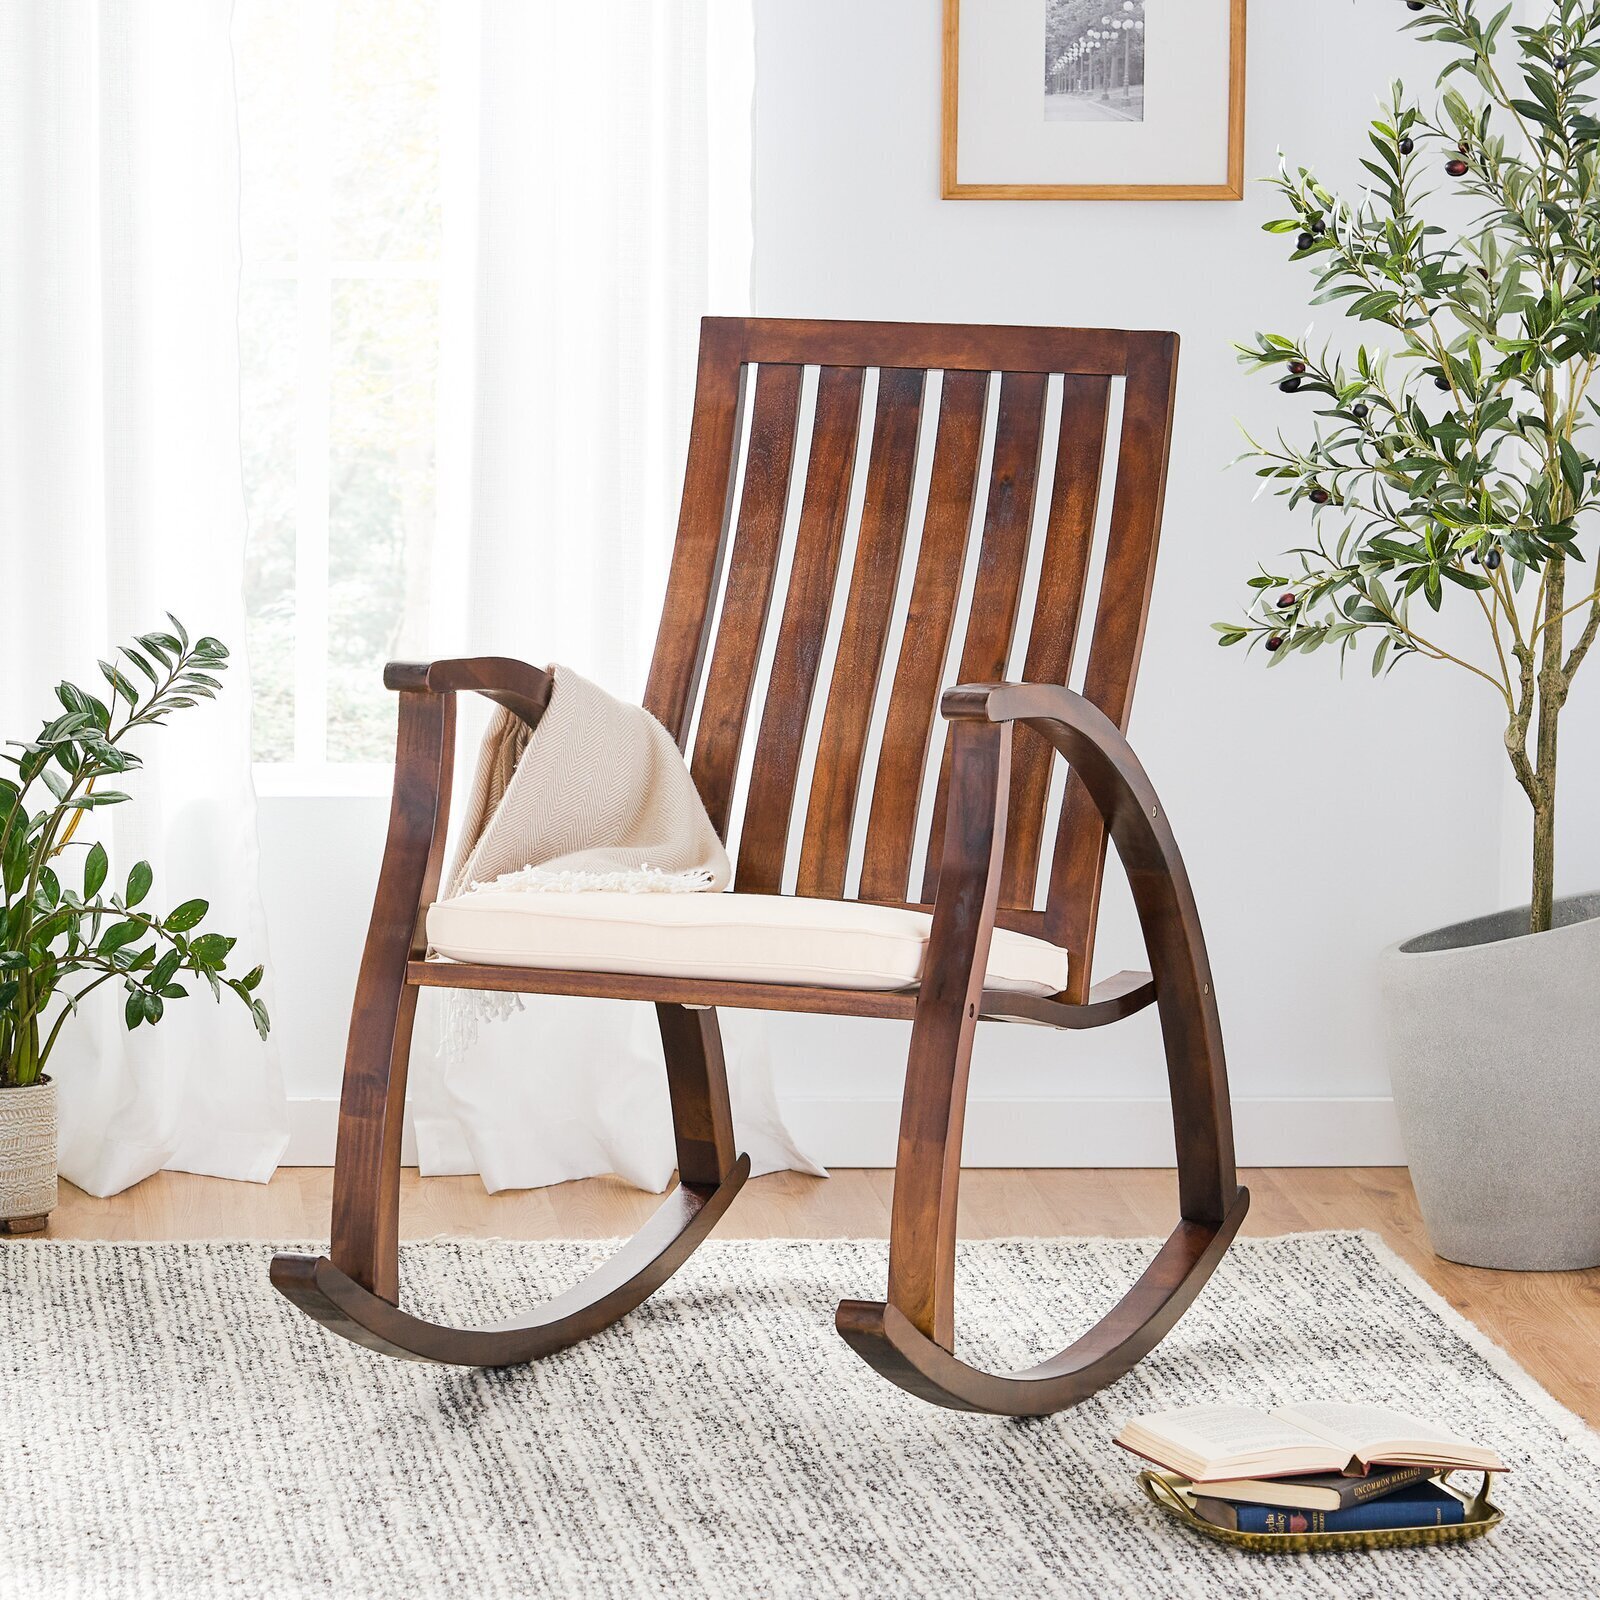 Solid Wood Indoor Rocking Chair With Cushion